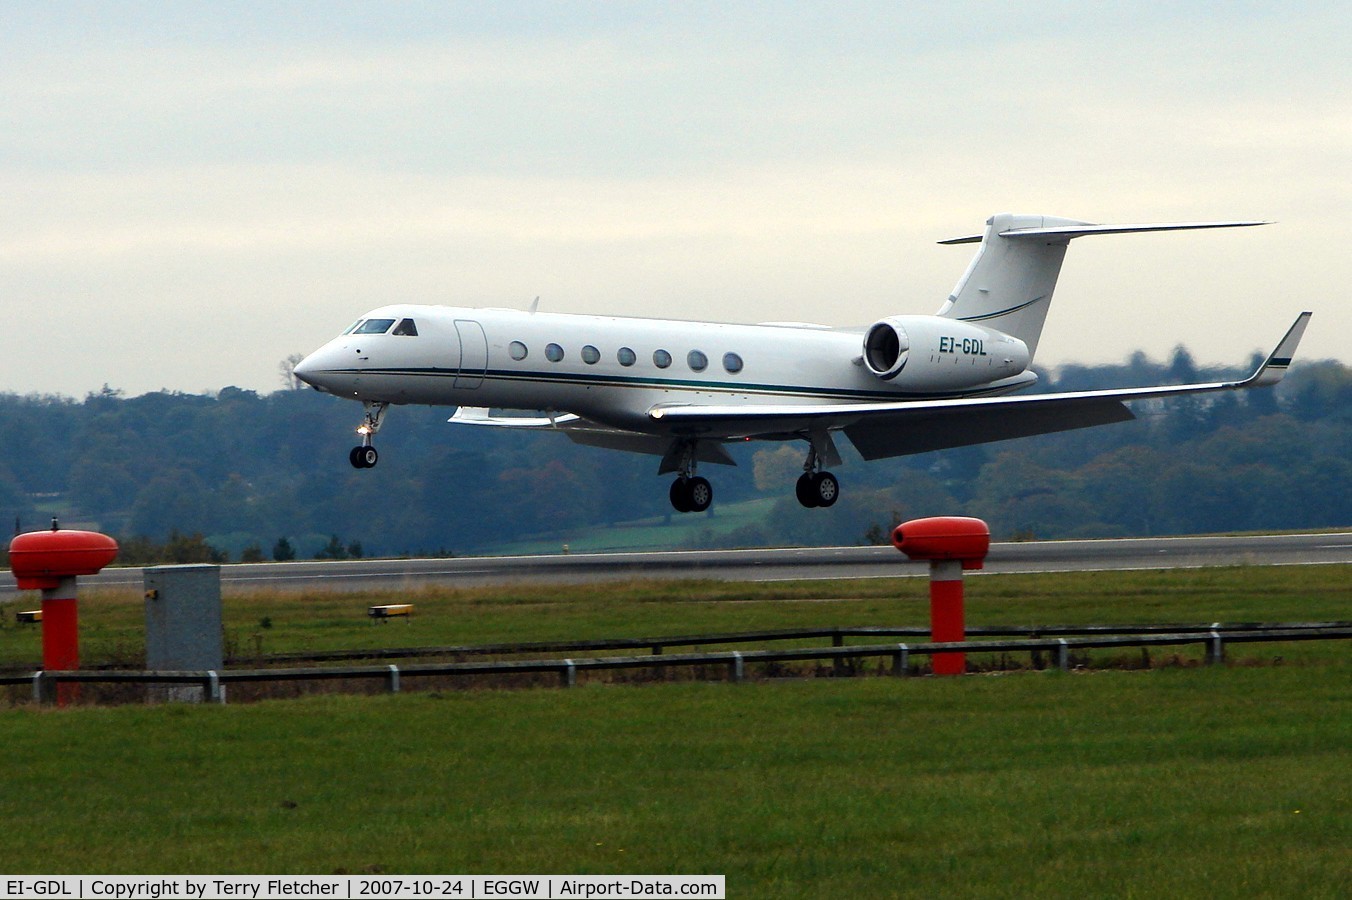 EI-GDL, 2005 Gulfstream Aerospace GV-SP (G550) C/N 5068, on a busy day at Luton Airport (UK)